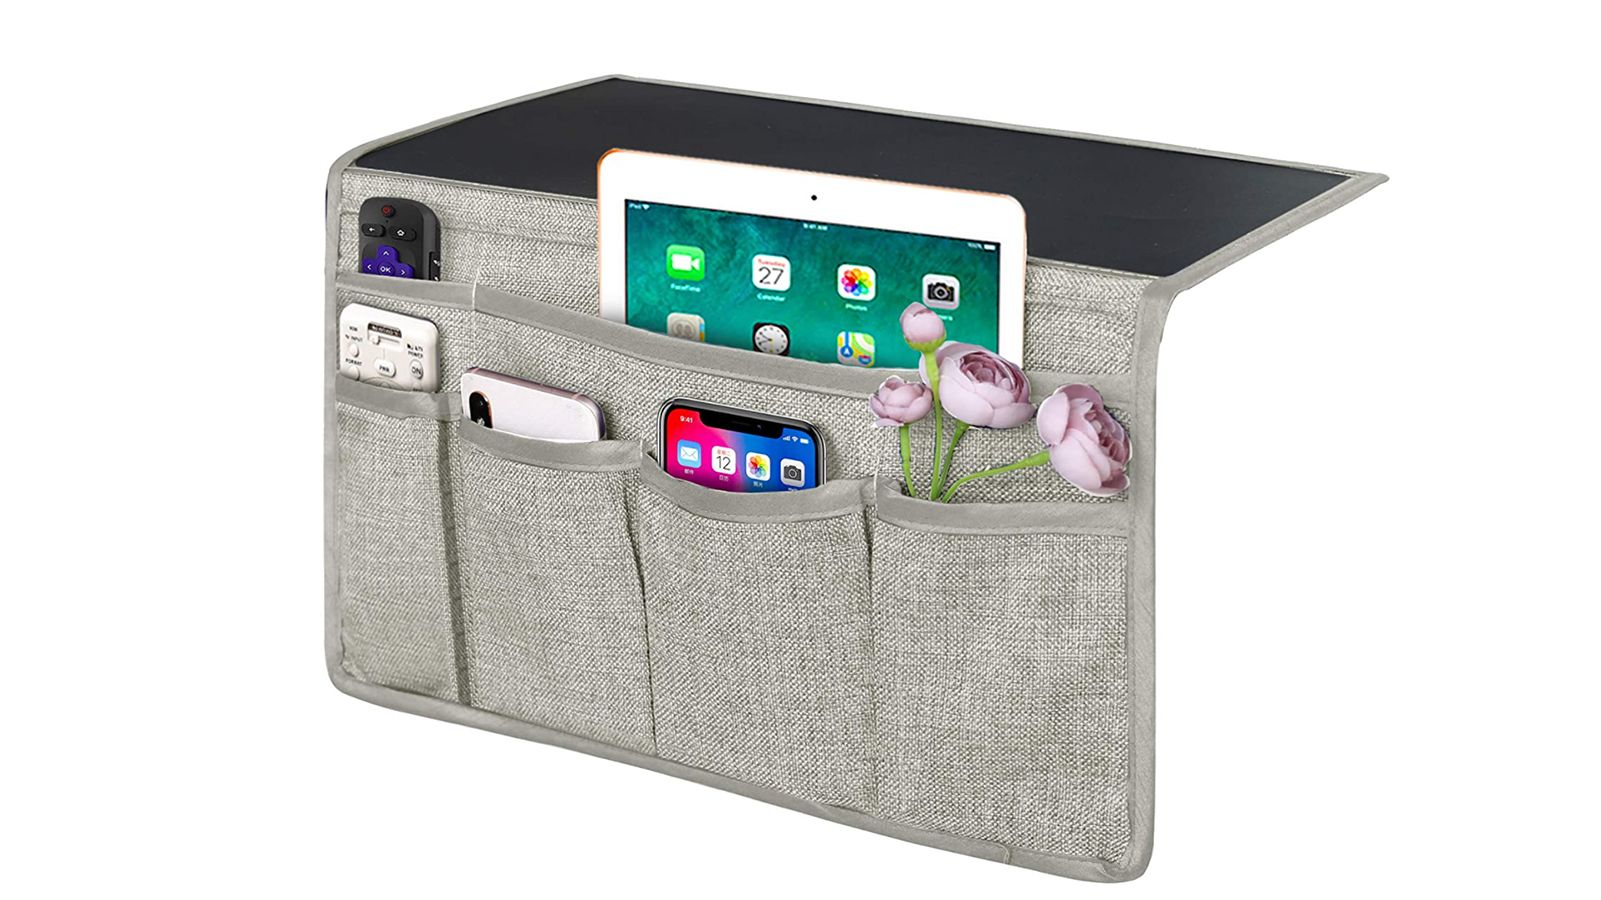 20 Bedroom Organization Products That Will Transform Your Room